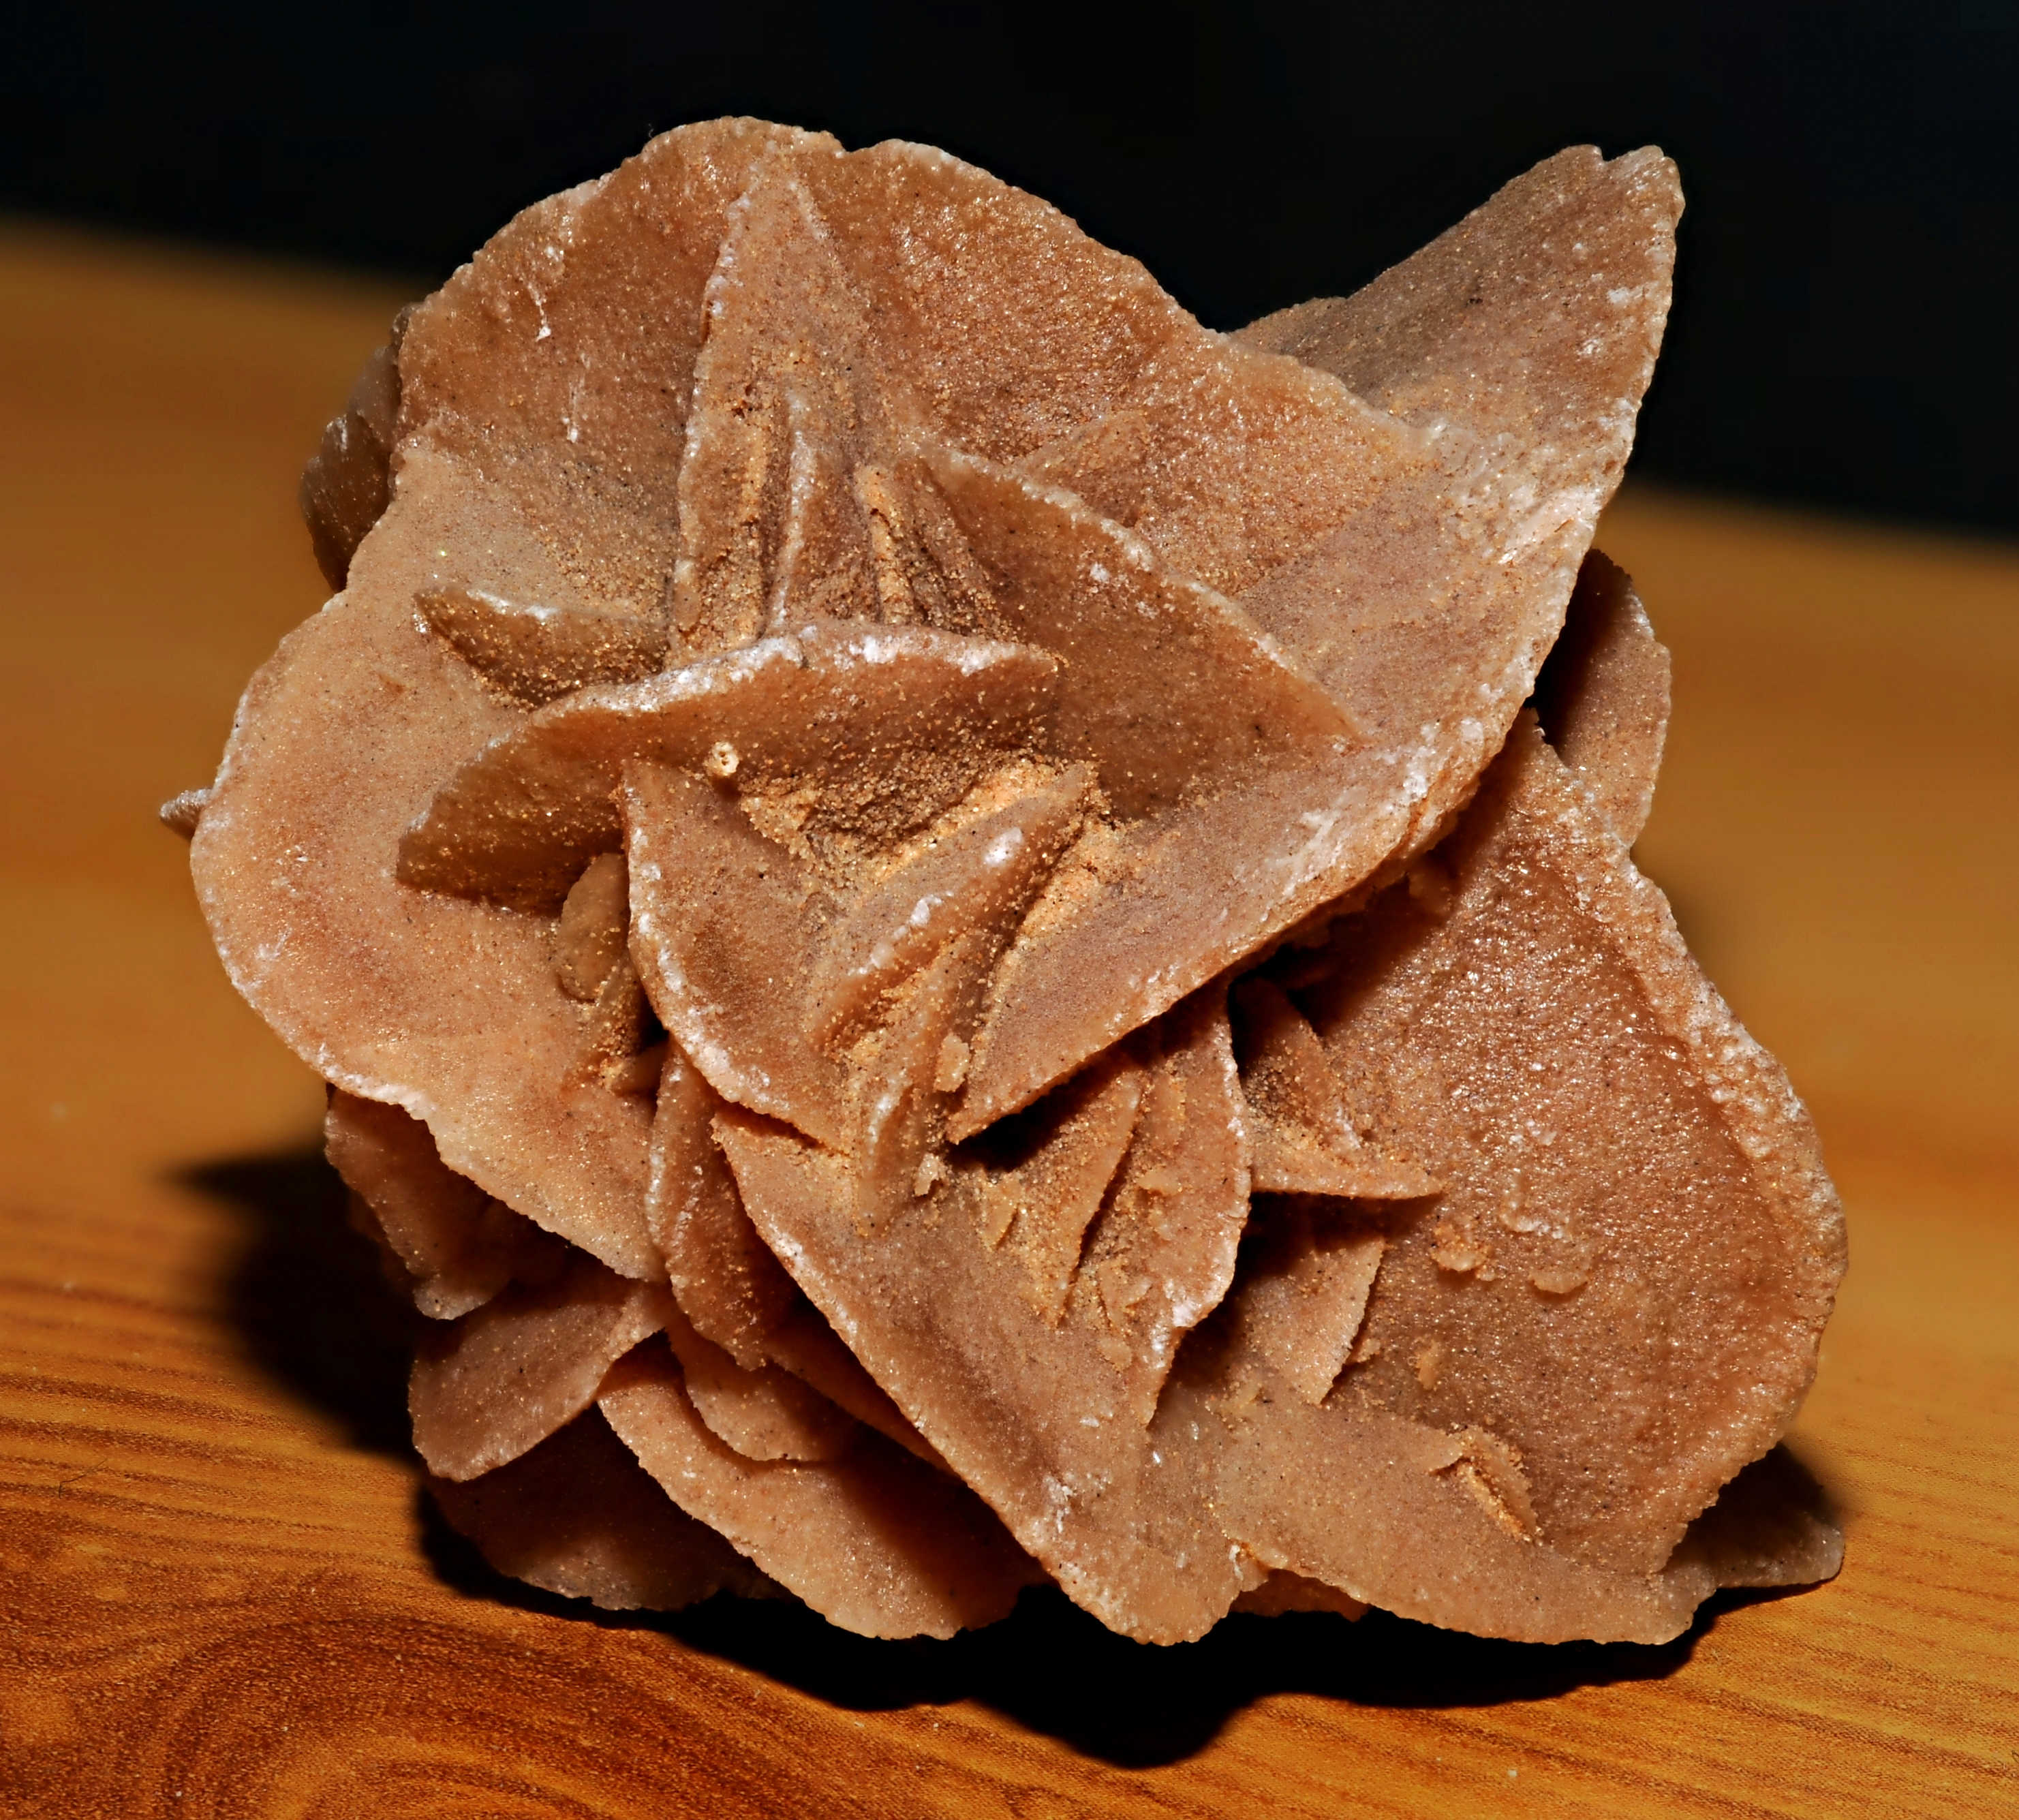 File:2011-11-27-rose des sables.jpg - Wikimedia Commons